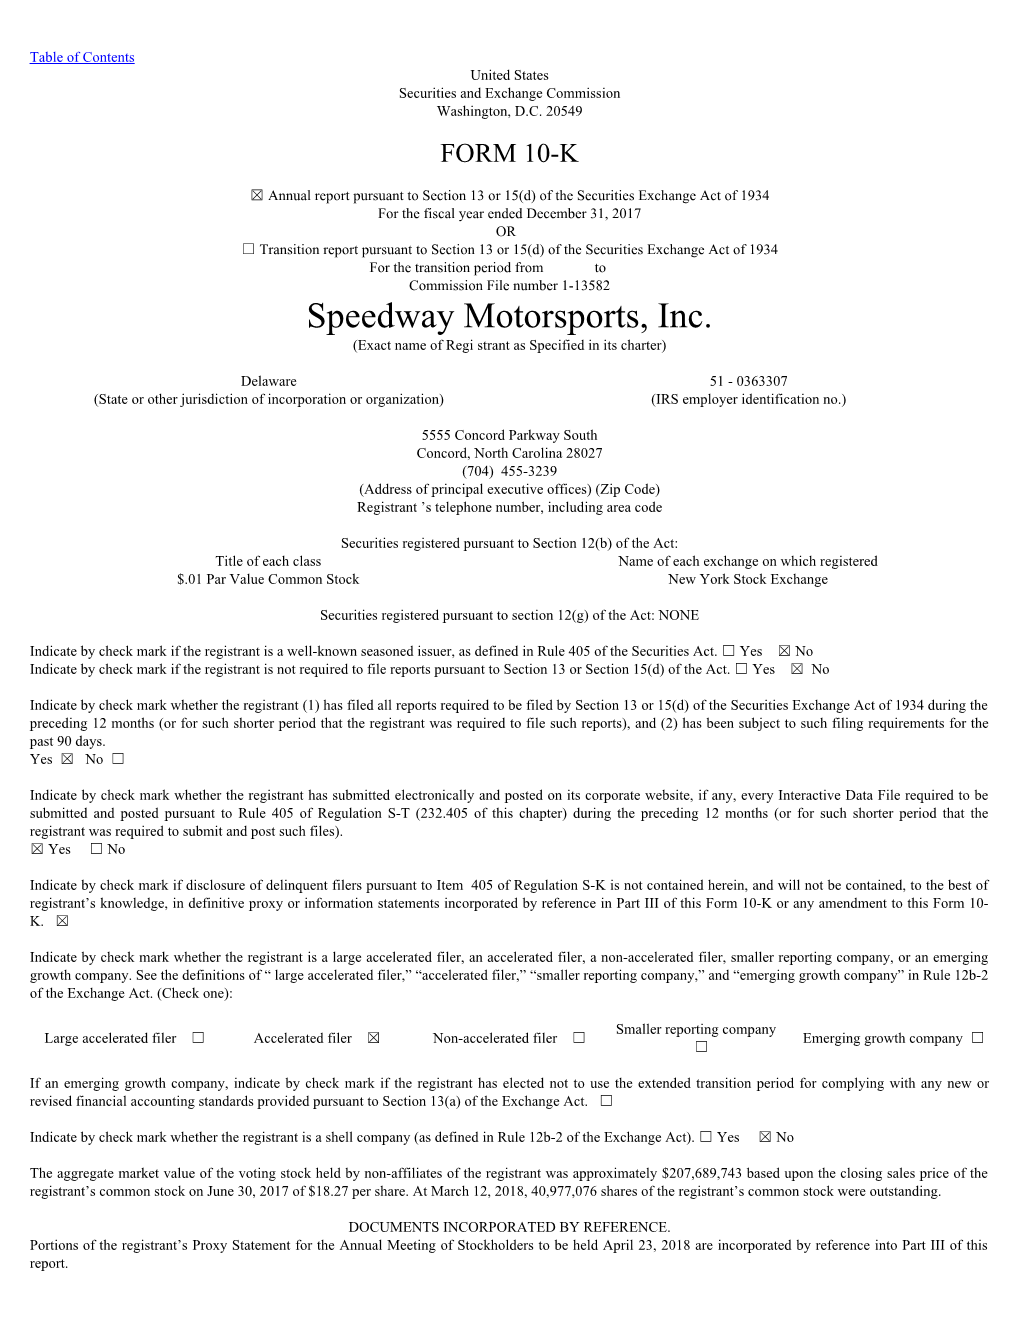 Speedway Motorsports, Inc. (Exact Name of Regi Strant As Specified in Its Charter)